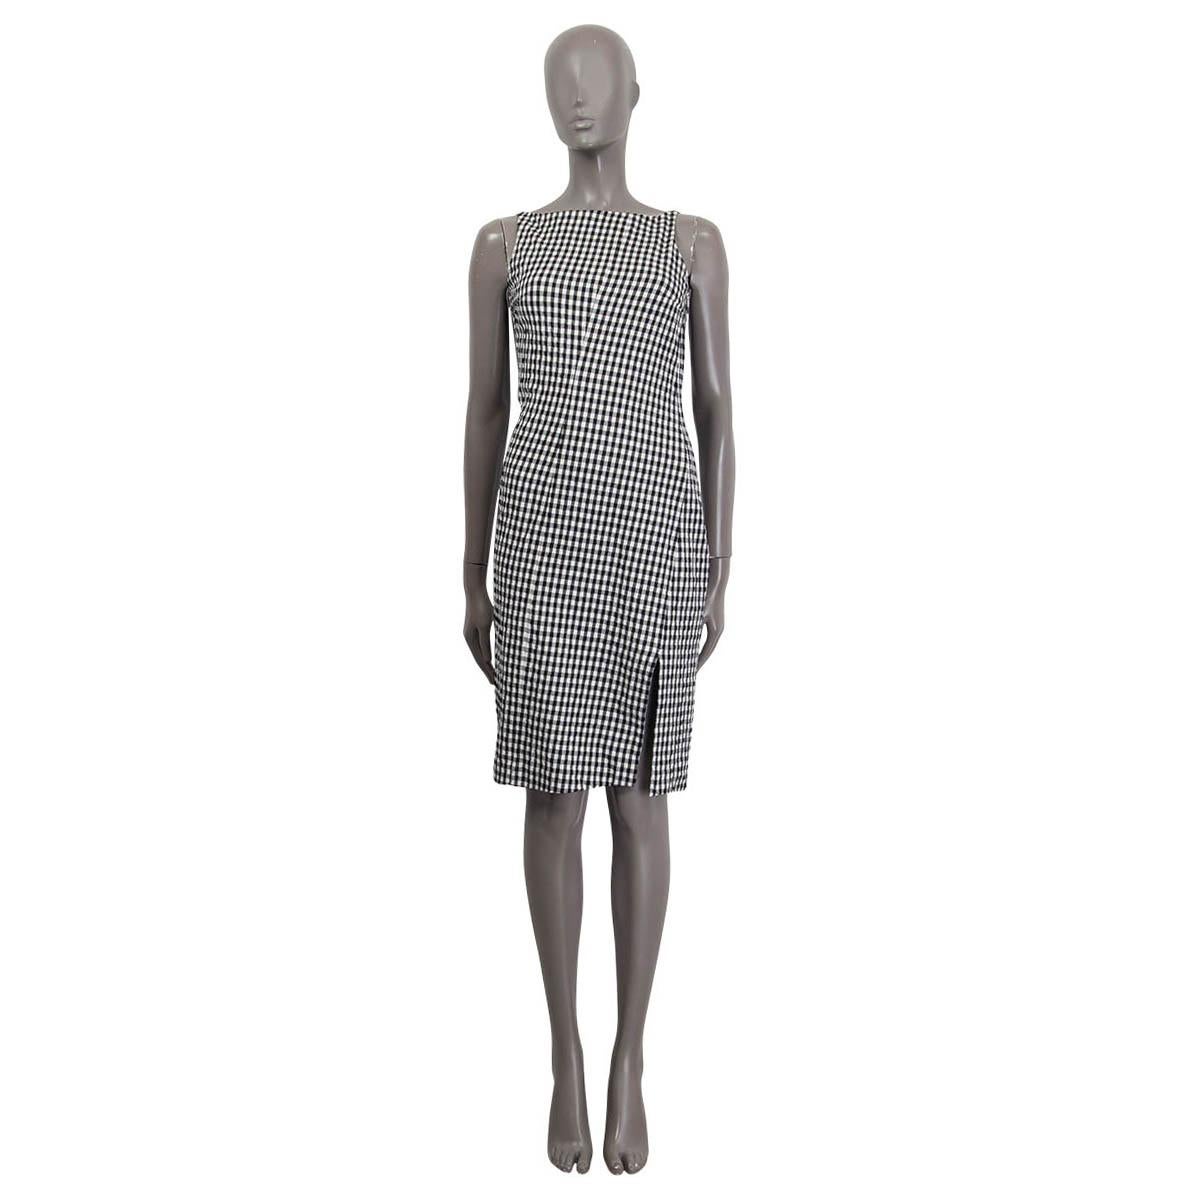 100% authentic Altuzarra 'Nerissa' sleeveless gingham dress in black and white cotton (98%) and elastane (2%). Features a slit on the side. Opens with a concealed zipper and a hook at the side. Unlined. Has been worn and is in excellent